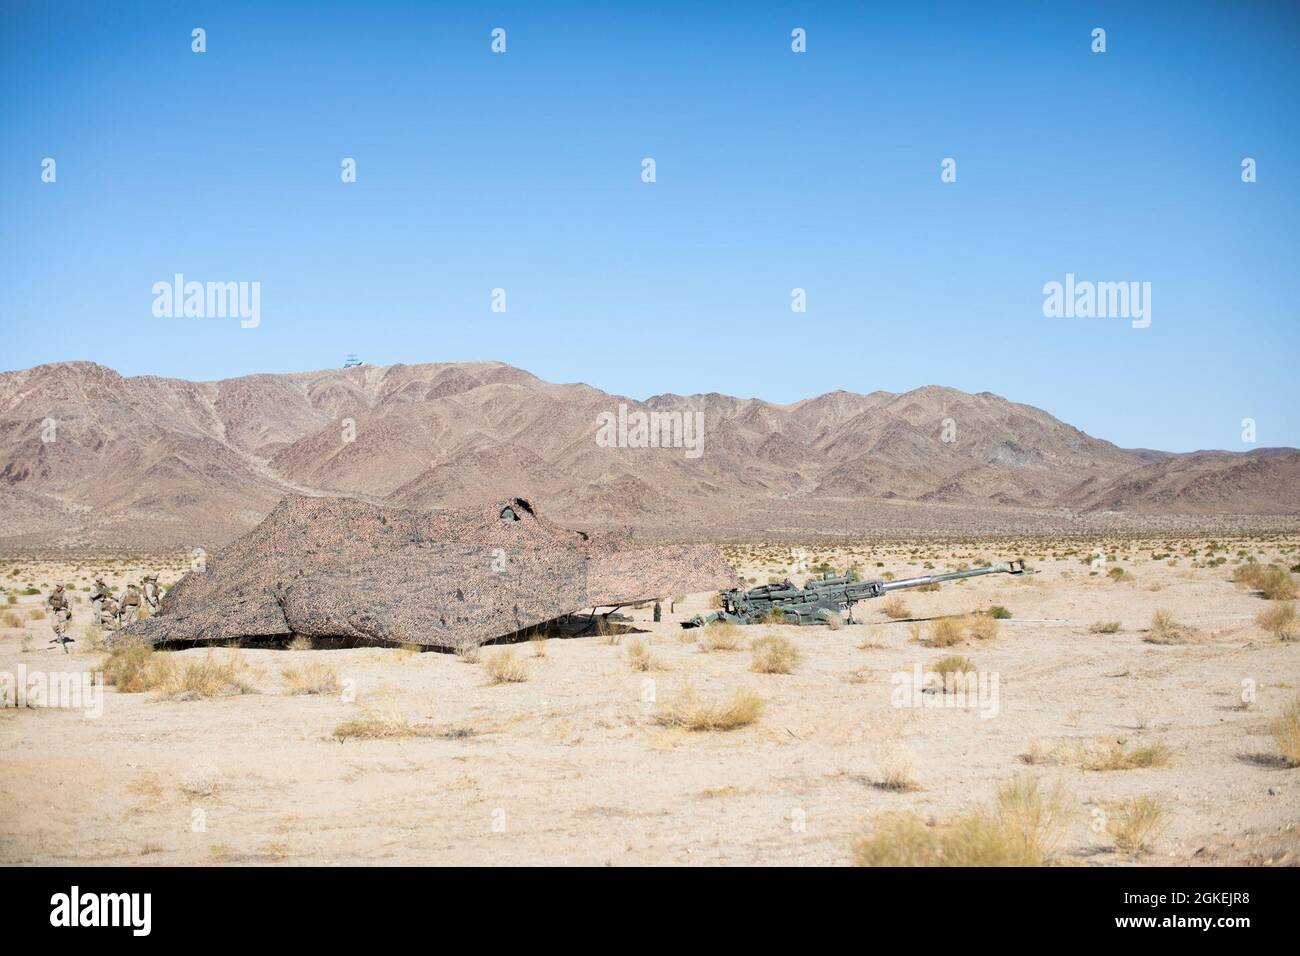 U.S. Marines with Battery C, 1st Battalion, 11th Marine Regiment, 1st Marine Division, conceal their fighting positions before beginning a live-fire defense simulation at the Marine Corps Air Ground Combat Center in Twentynine Palms, California, March 31, 2021. Marines use concealment to make it more difficult for their positions to be seen by air support or reconnaissance efforts. During this live-fire training, the battery used M777 towed 155 mm howitzers, .50-caliber machine guns, M240B machine guns as well as M4 carbines and M16A1 rifles to repel notional enemy attacks from the artillery p Stock Photo